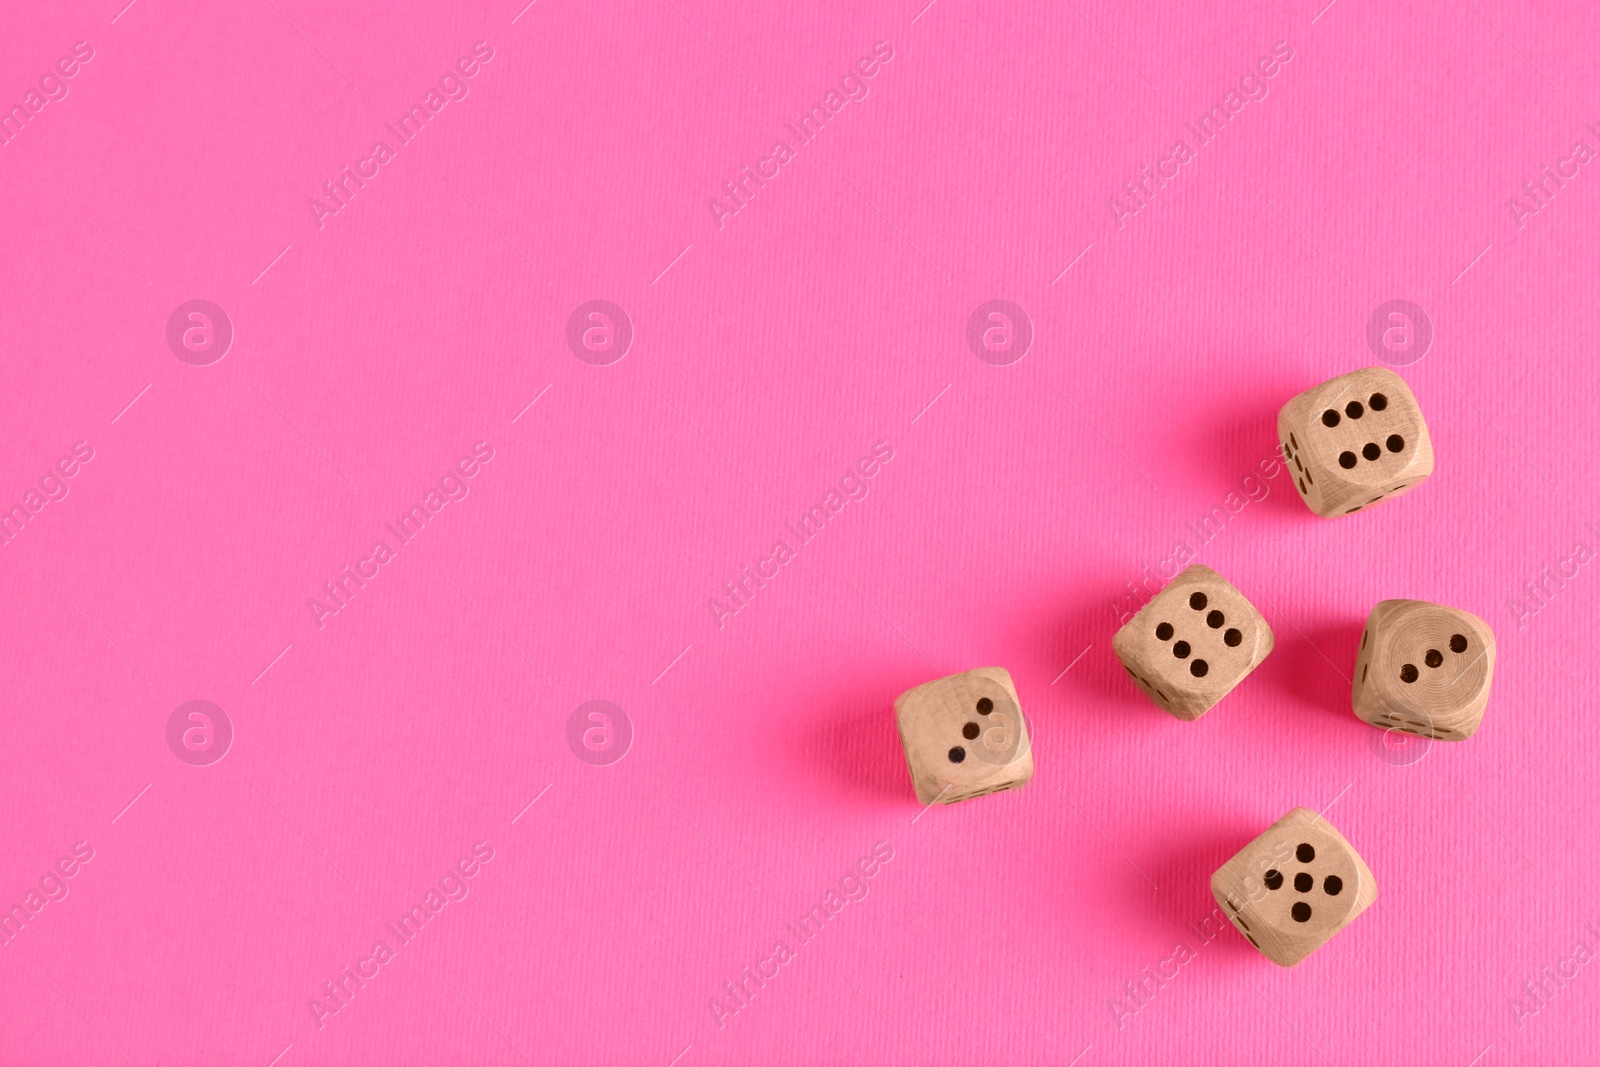 Photo of Many wooden game dices on pink background, flat lay. Space for text